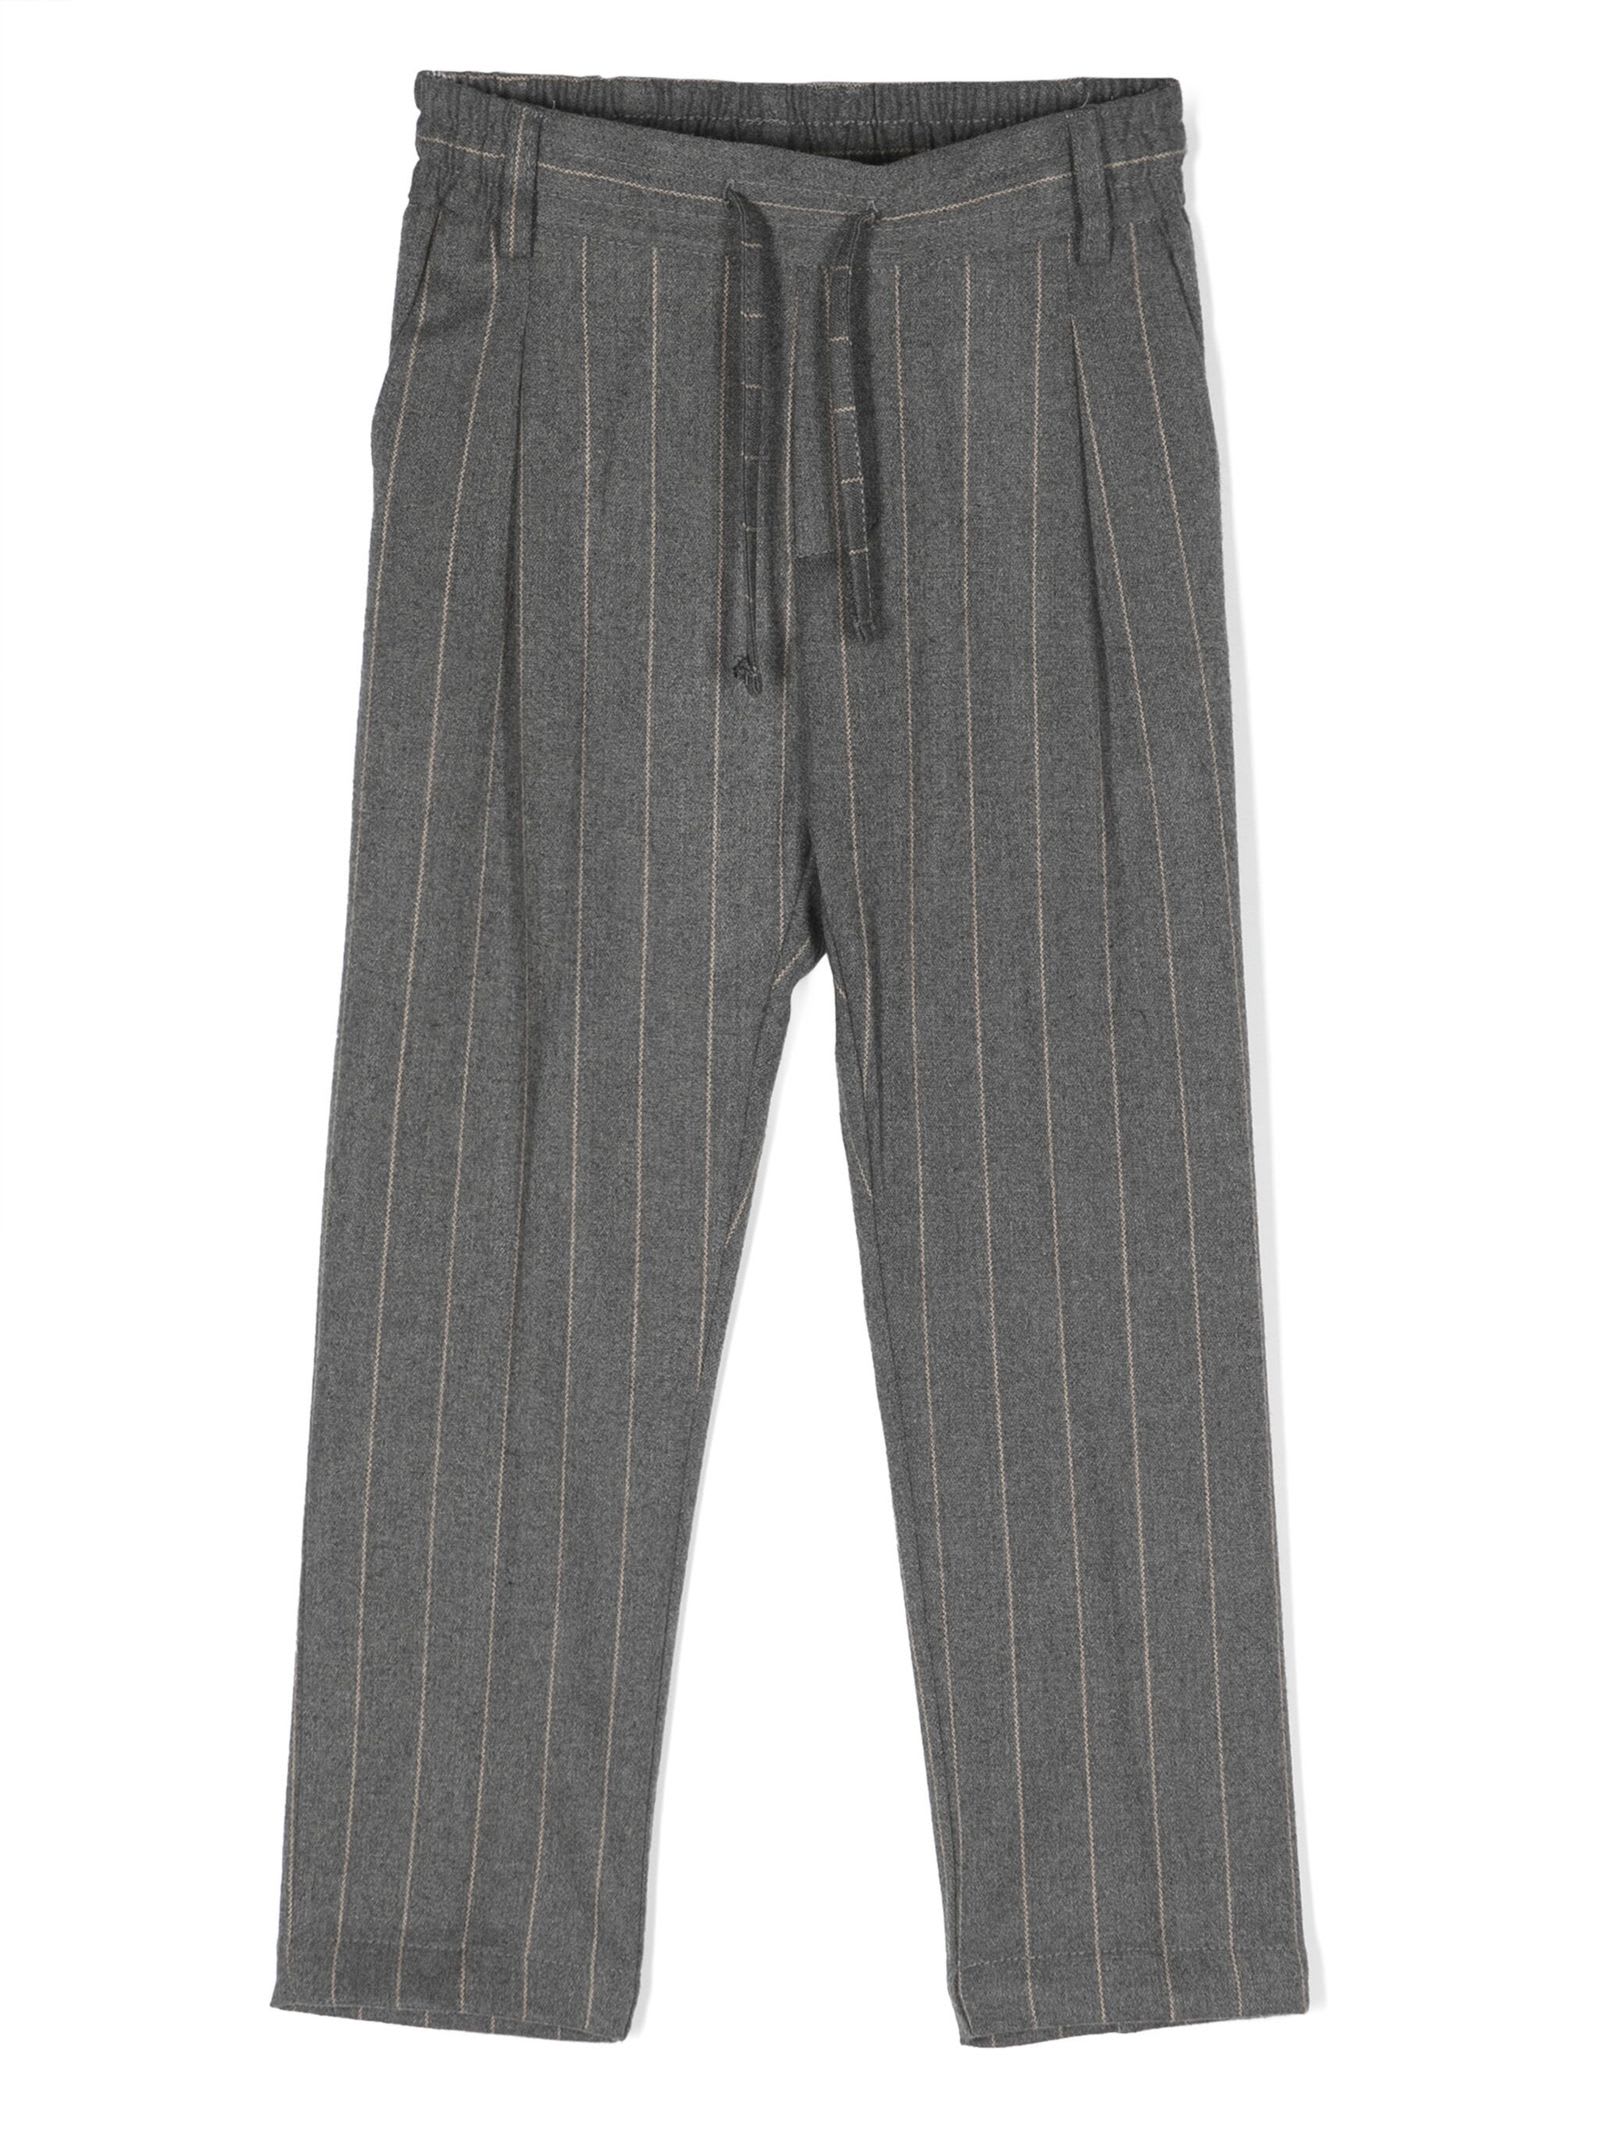 PAOLO PECORA GREY POLYESTER TROUSERS